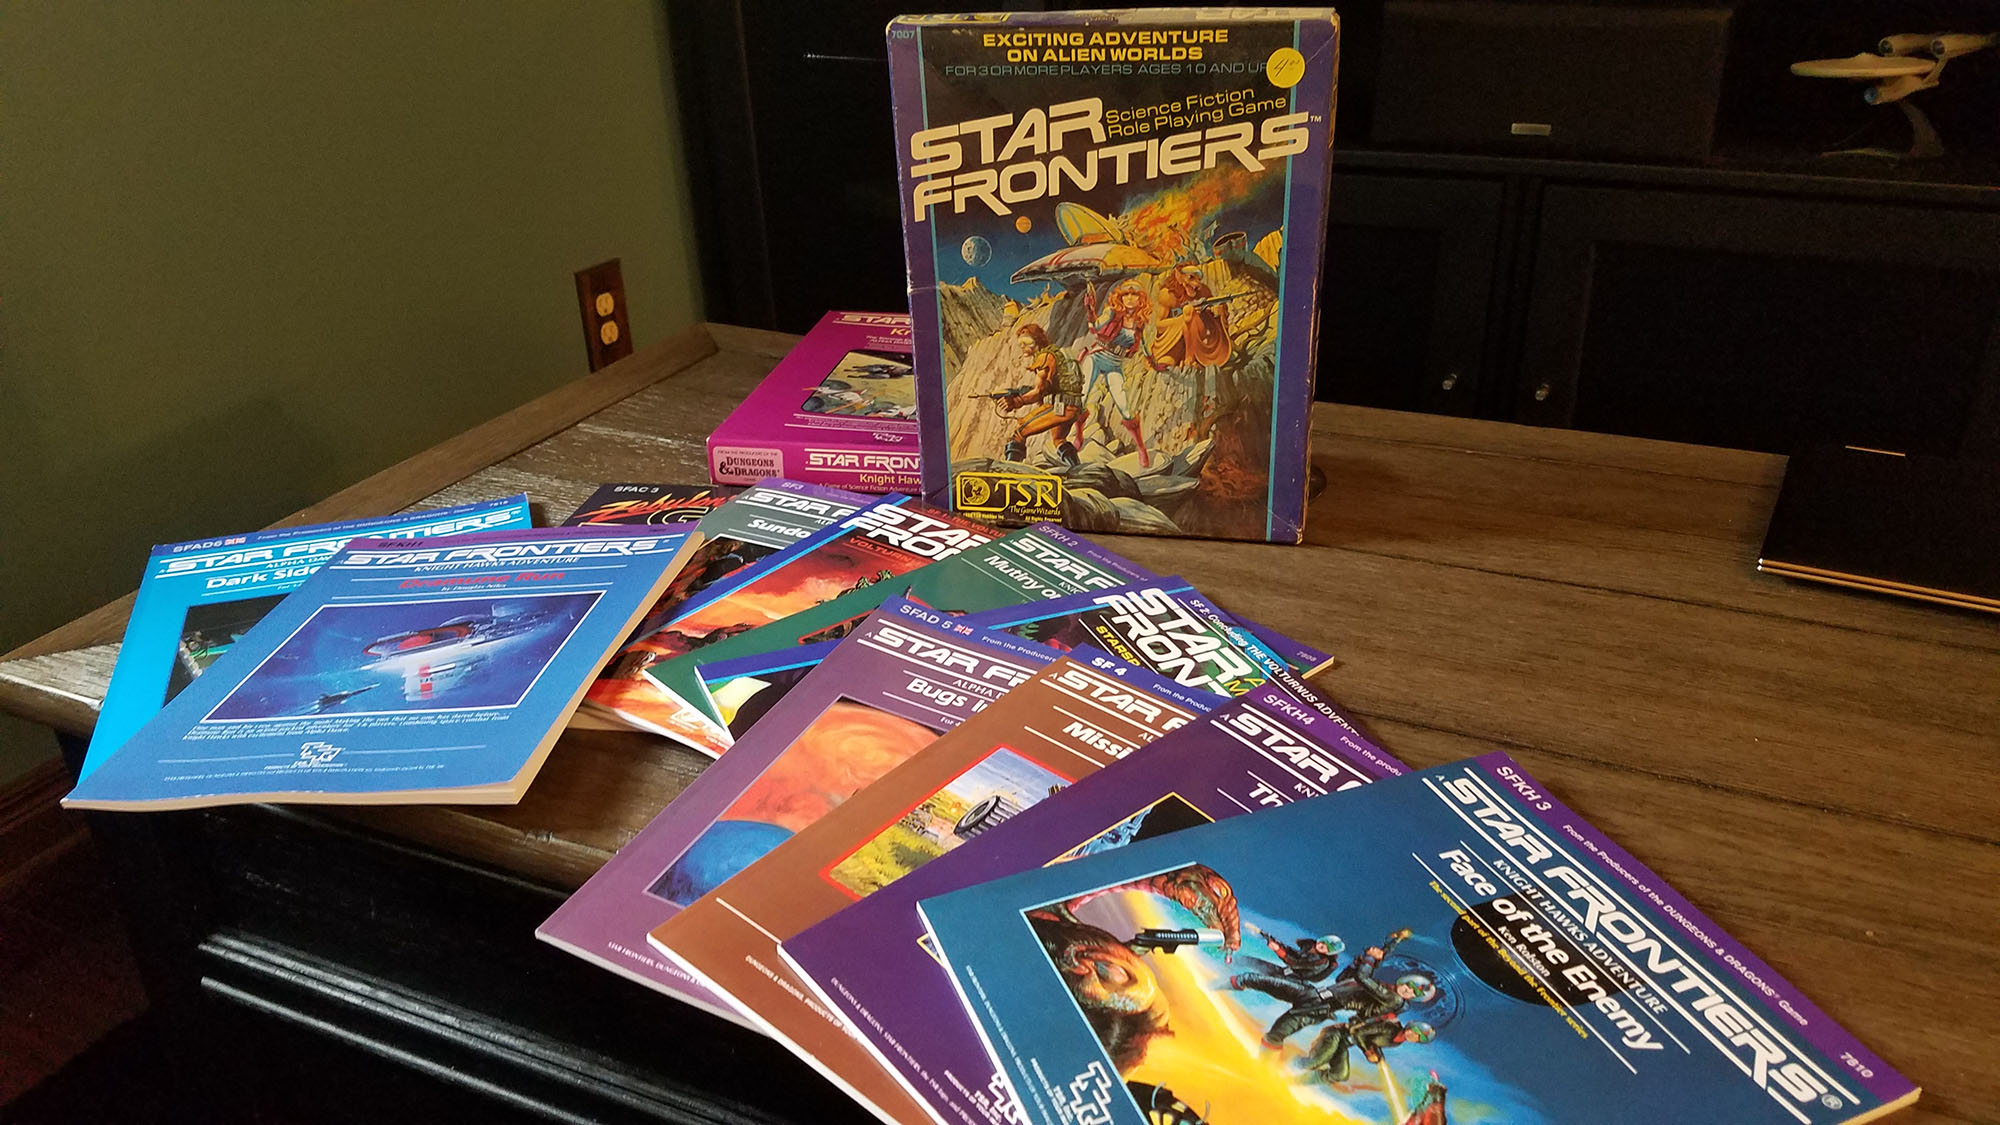 Star Frontiers RPG